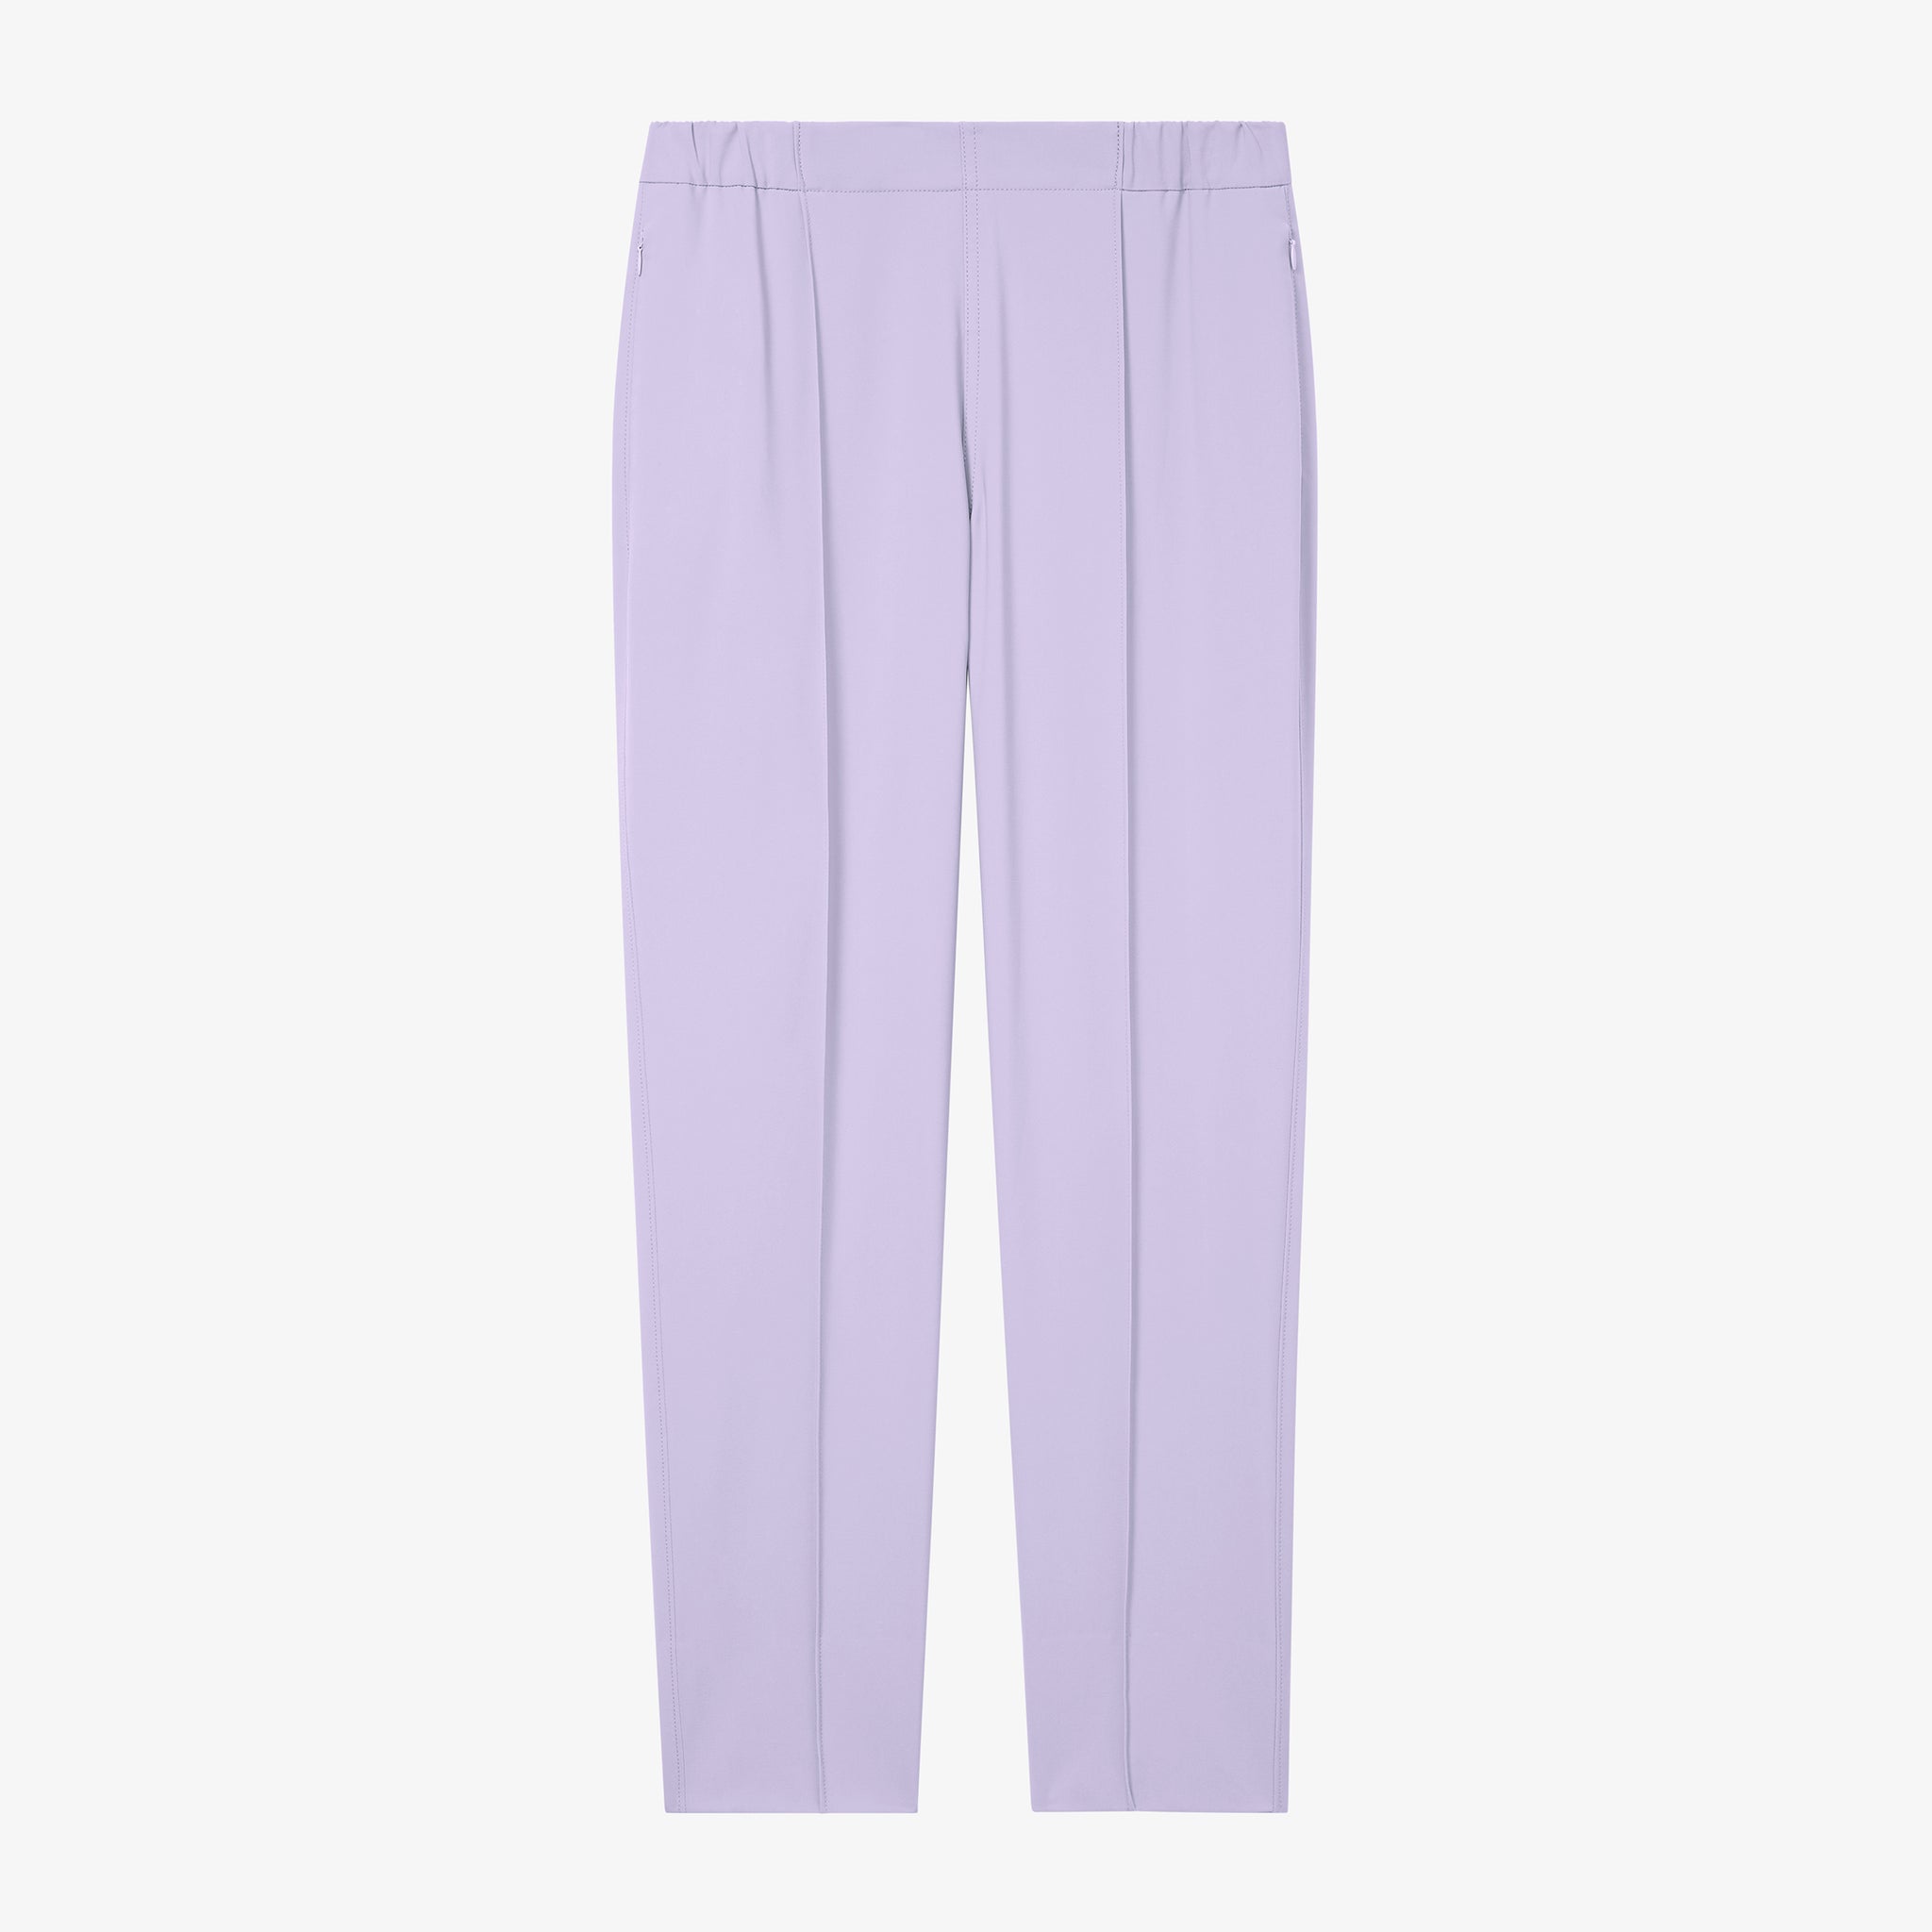 packshot image of the colby pants in light orchid